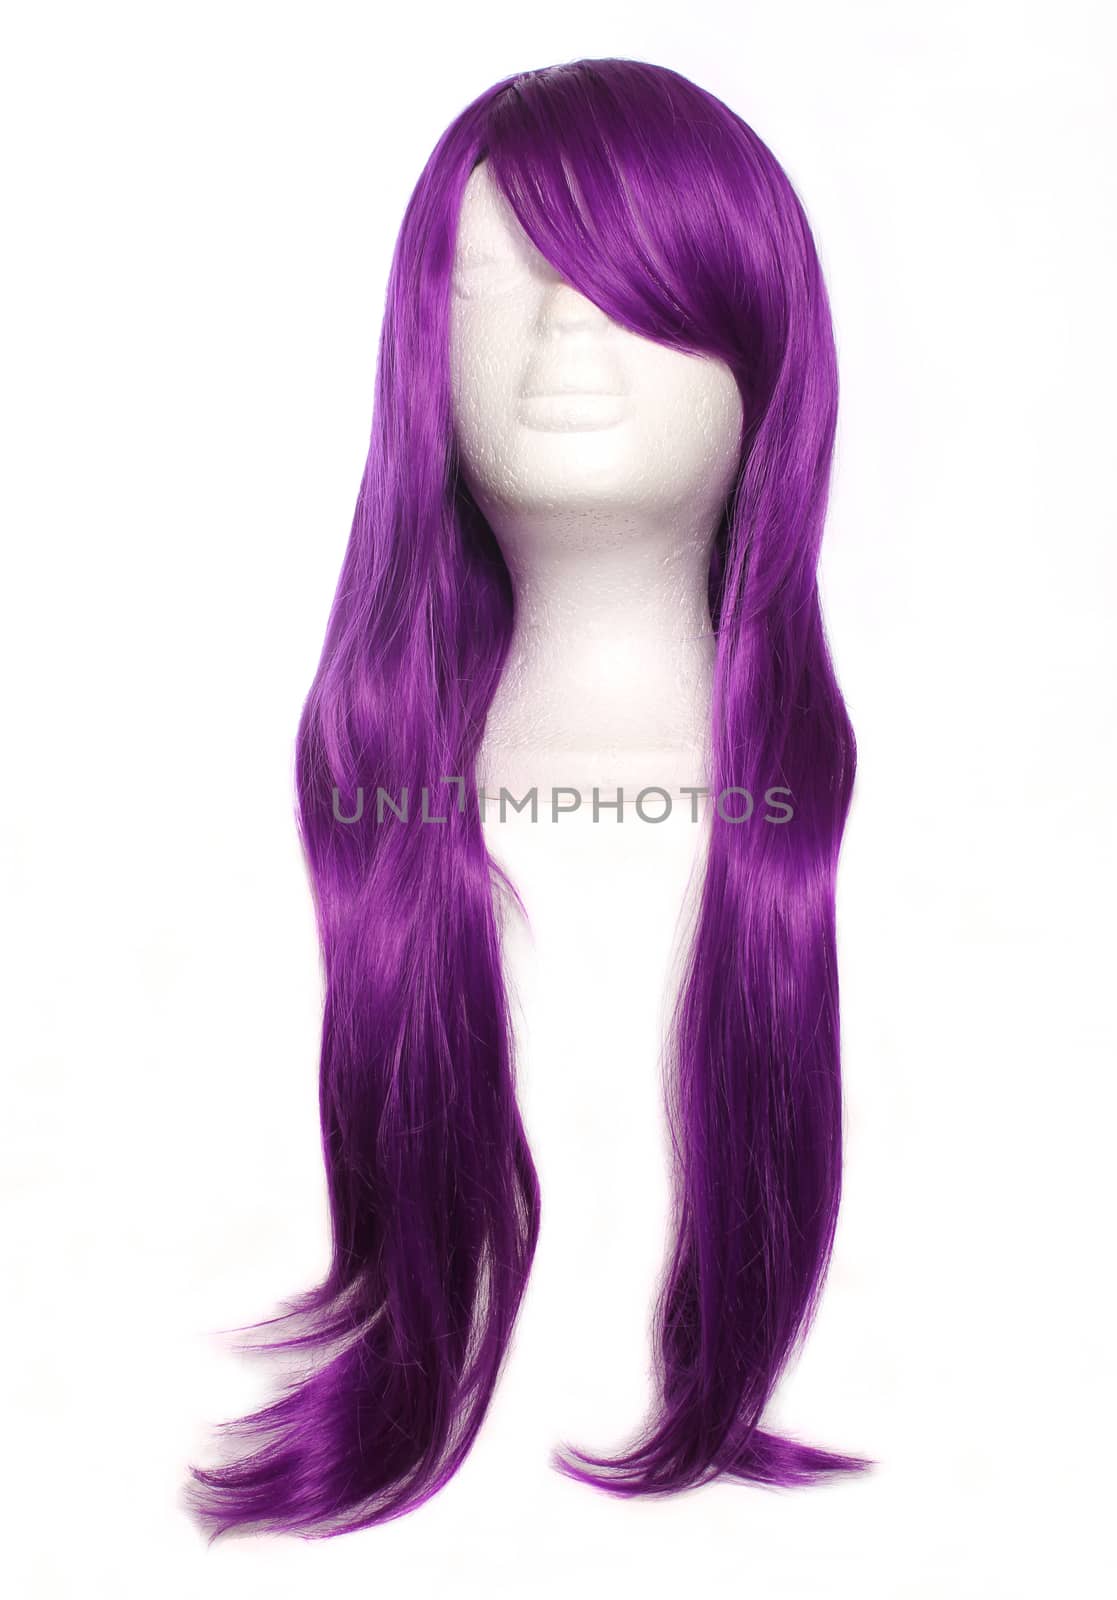 Purple Anime Style Wig on White by Marti157900